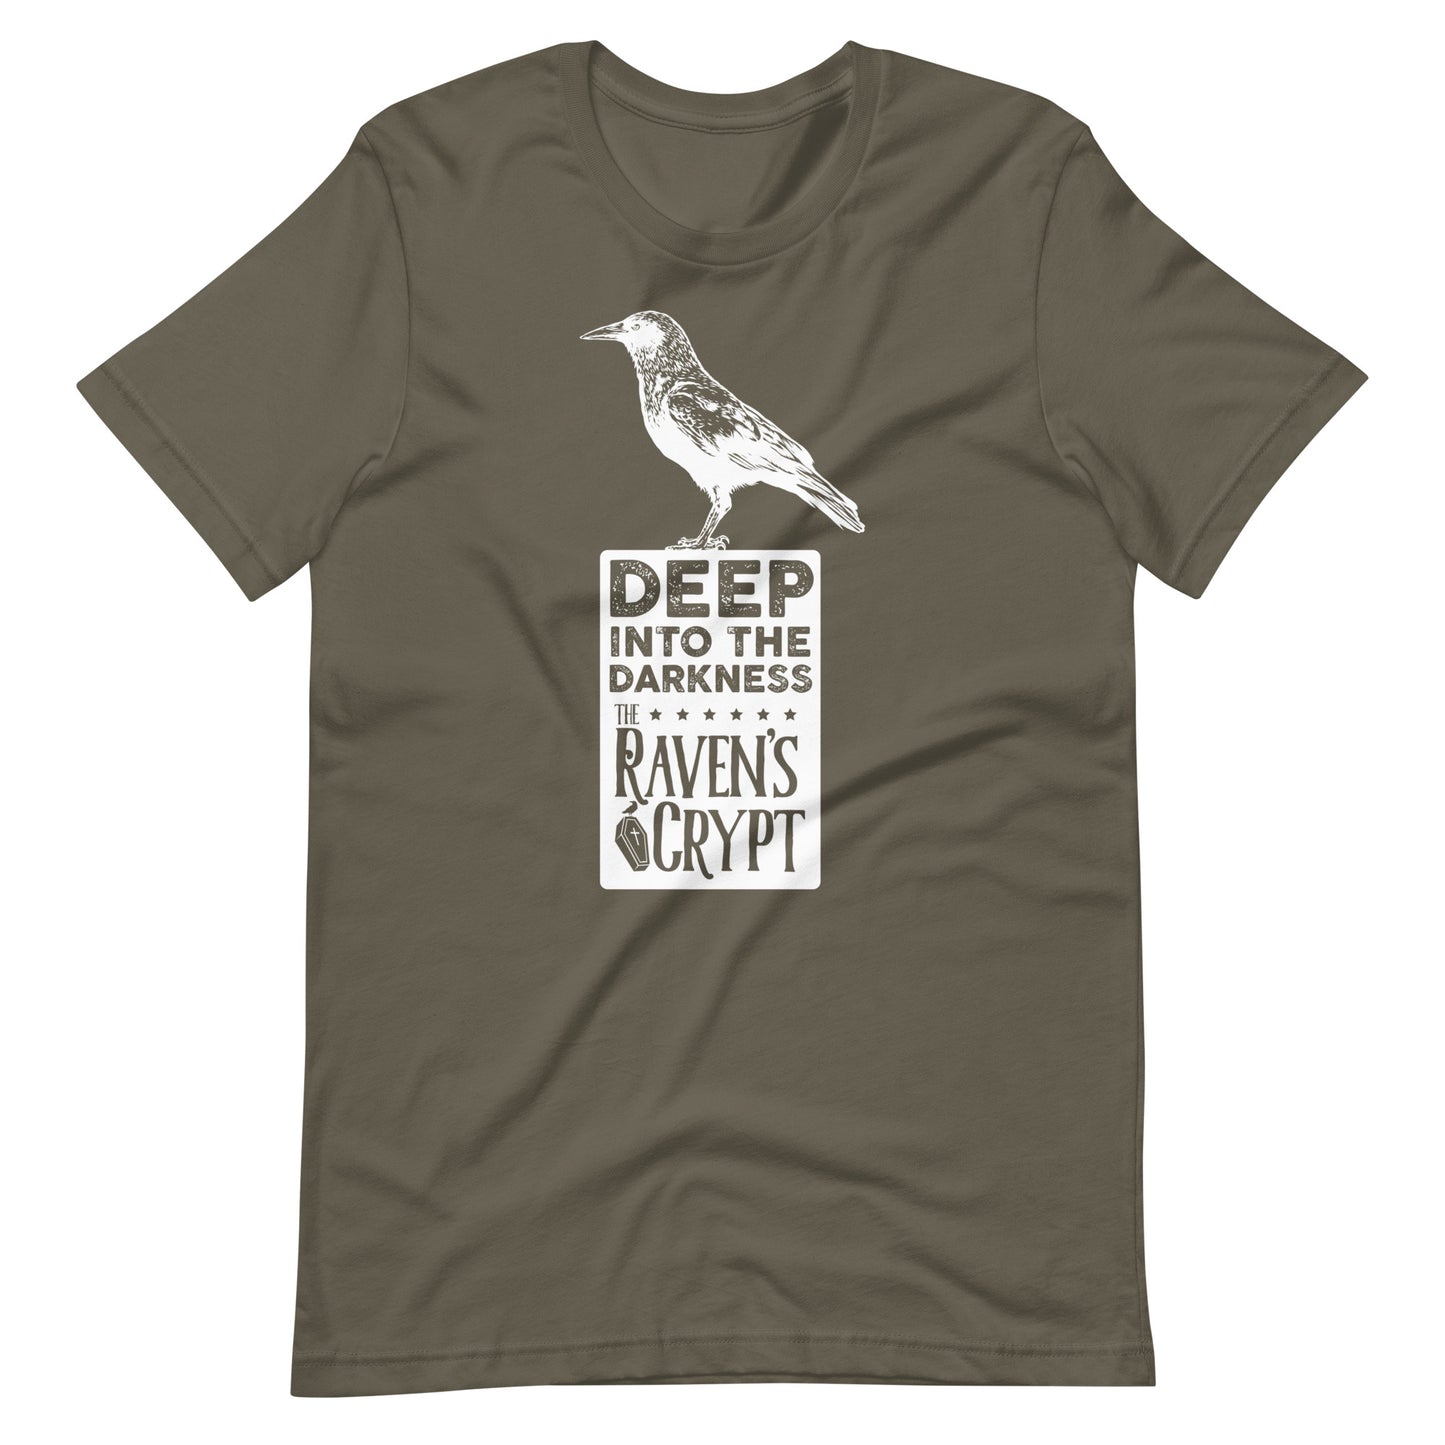 Deep Into the Darkness Crypt 2 - Men's t-shirt - Army Front